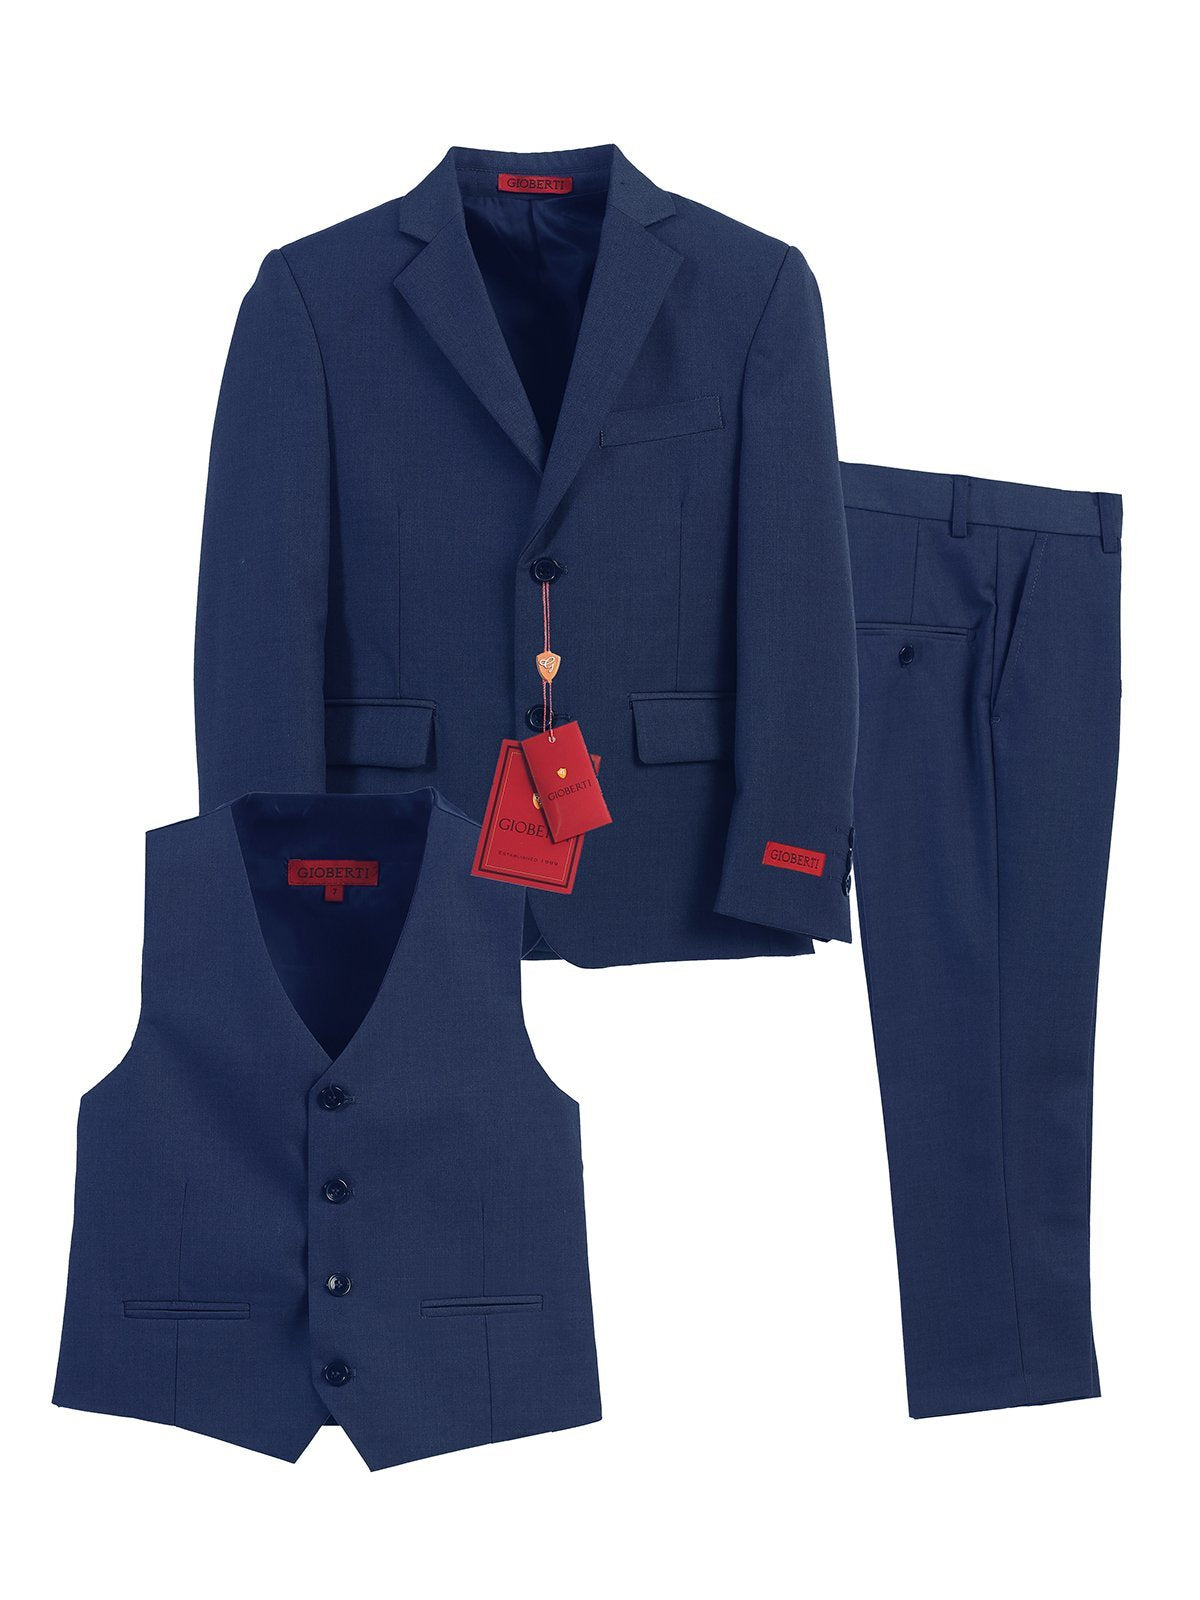 Boys Formal 3 Piece Suit Set with Jacket, Vest and Pants -GB-3BSV